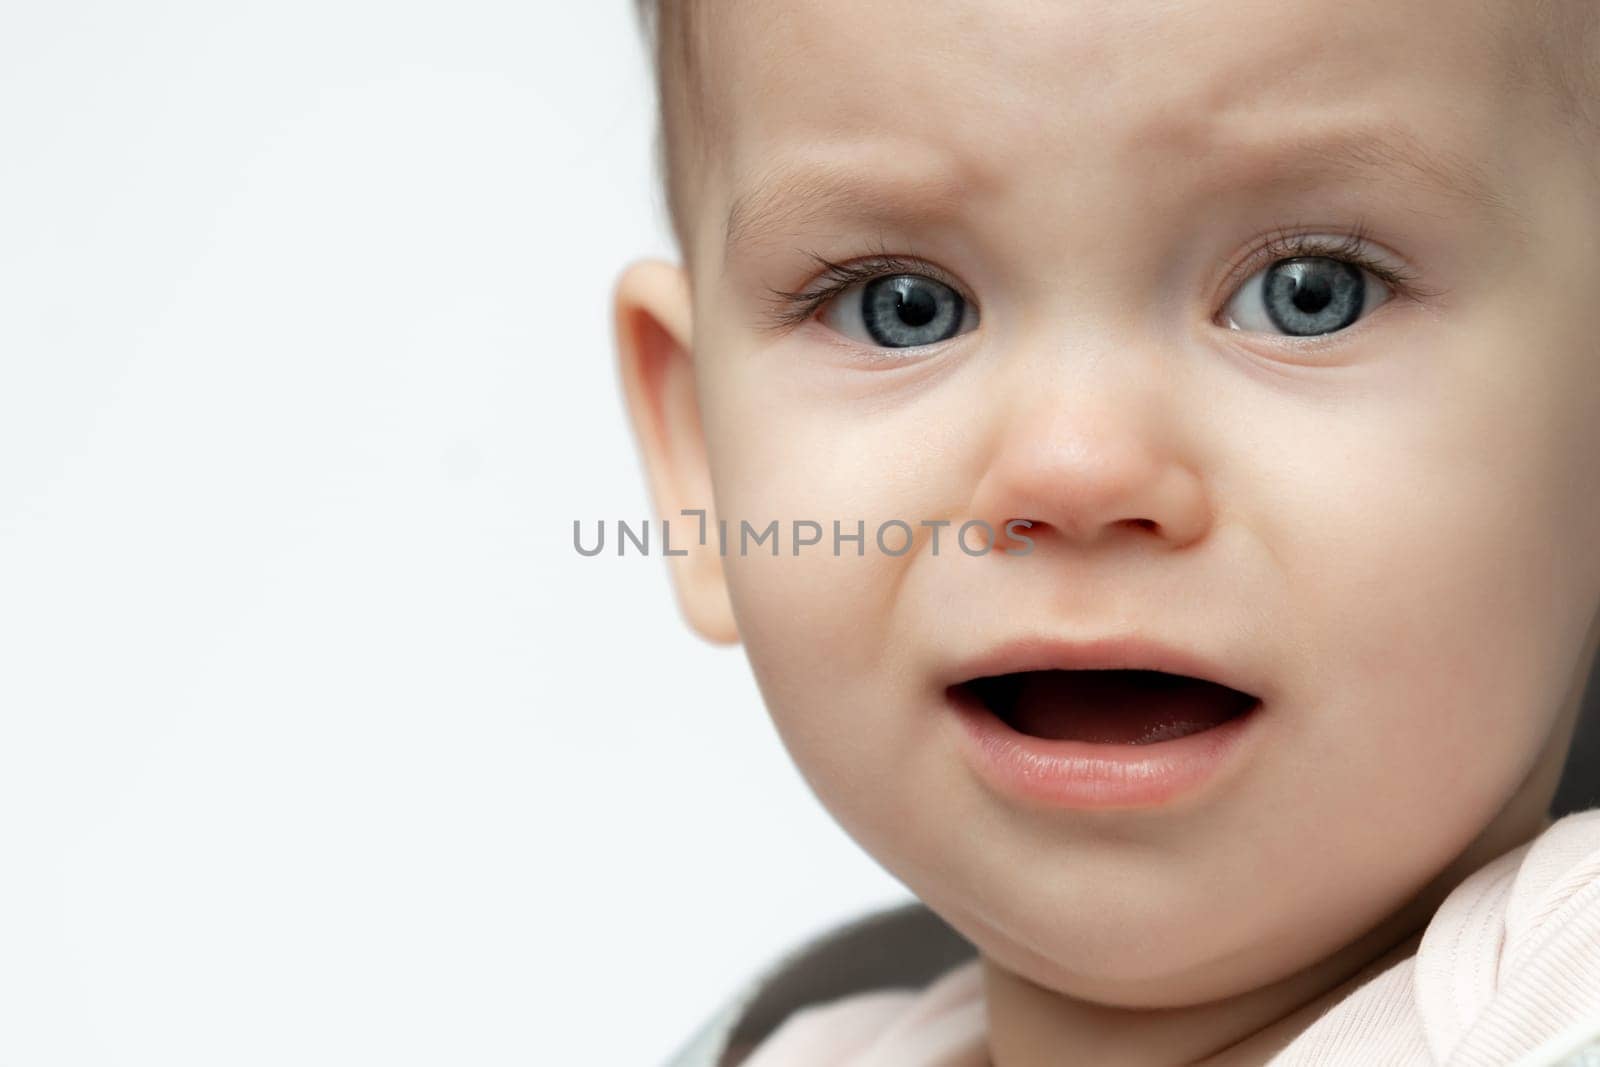 A closeup portrait captures a baby crying due to being tired and hungry, expressing a universal need for comfort. Concept of nurturing and parental care